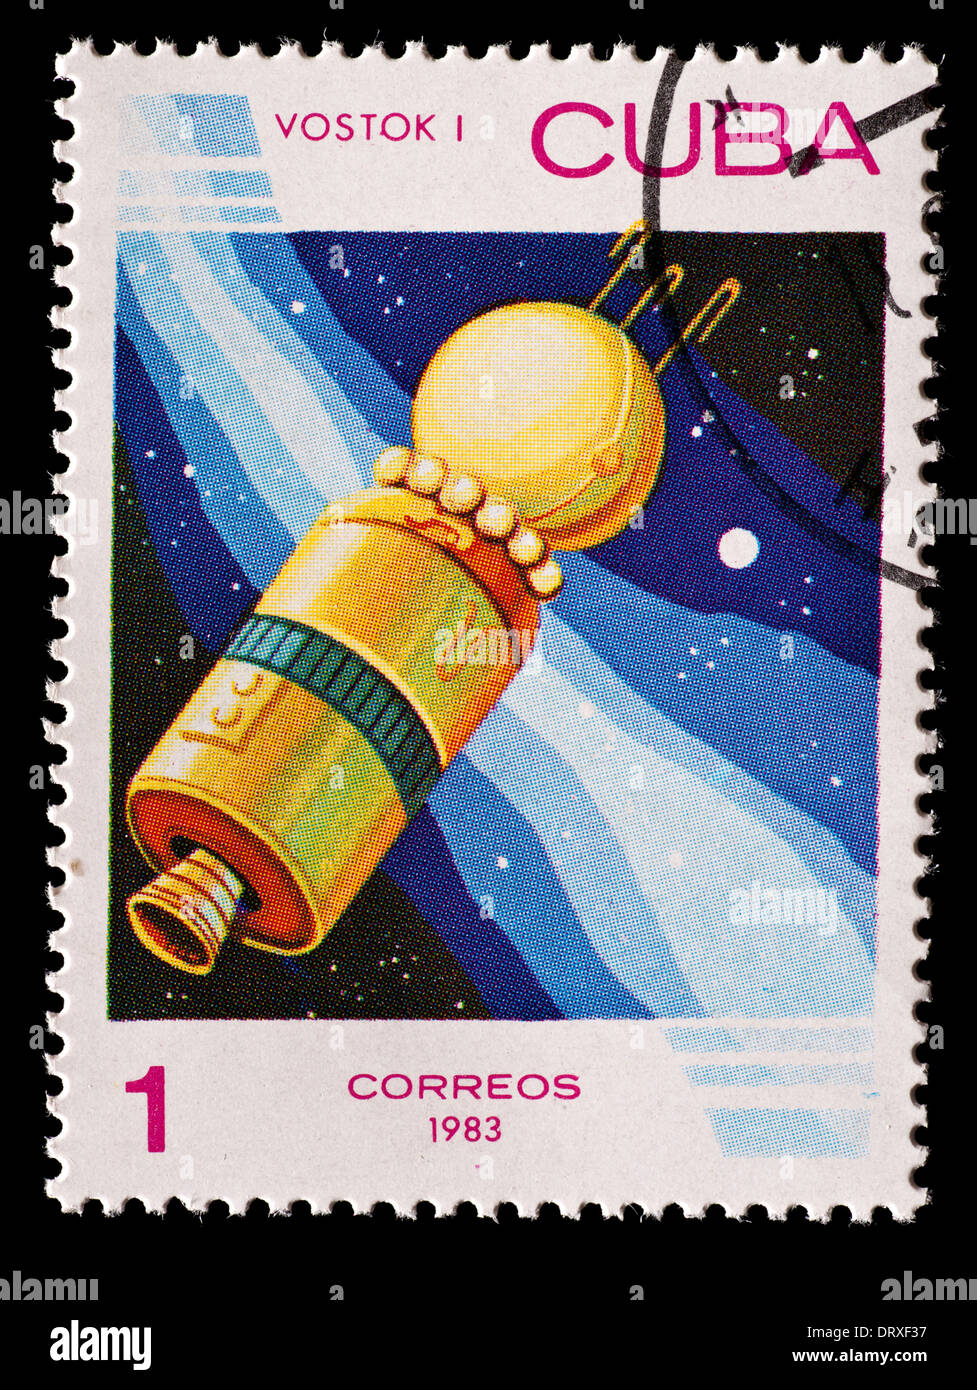 Postage stamp from Cuba depicting the satellite Vostok I Stock Photo